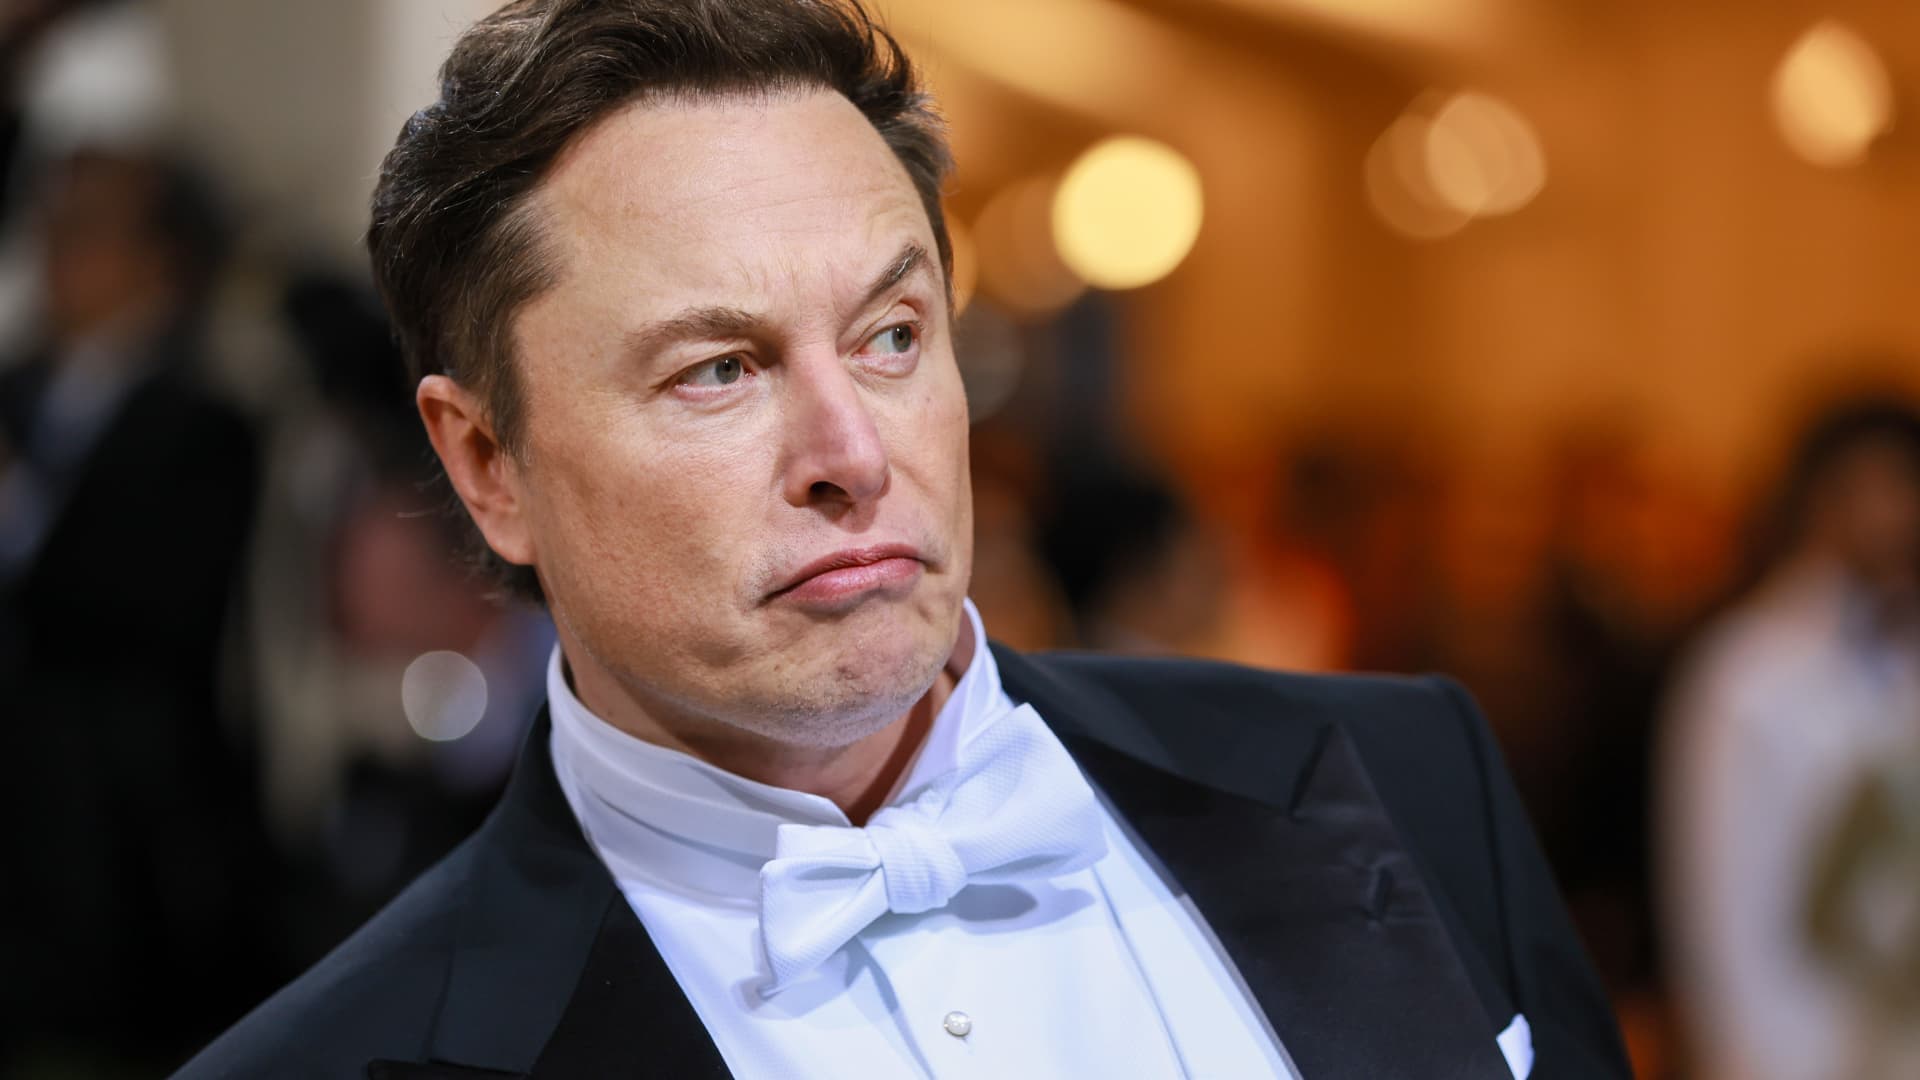 Elon Musk says it’s time for Trump to ‘sail into the sunset’